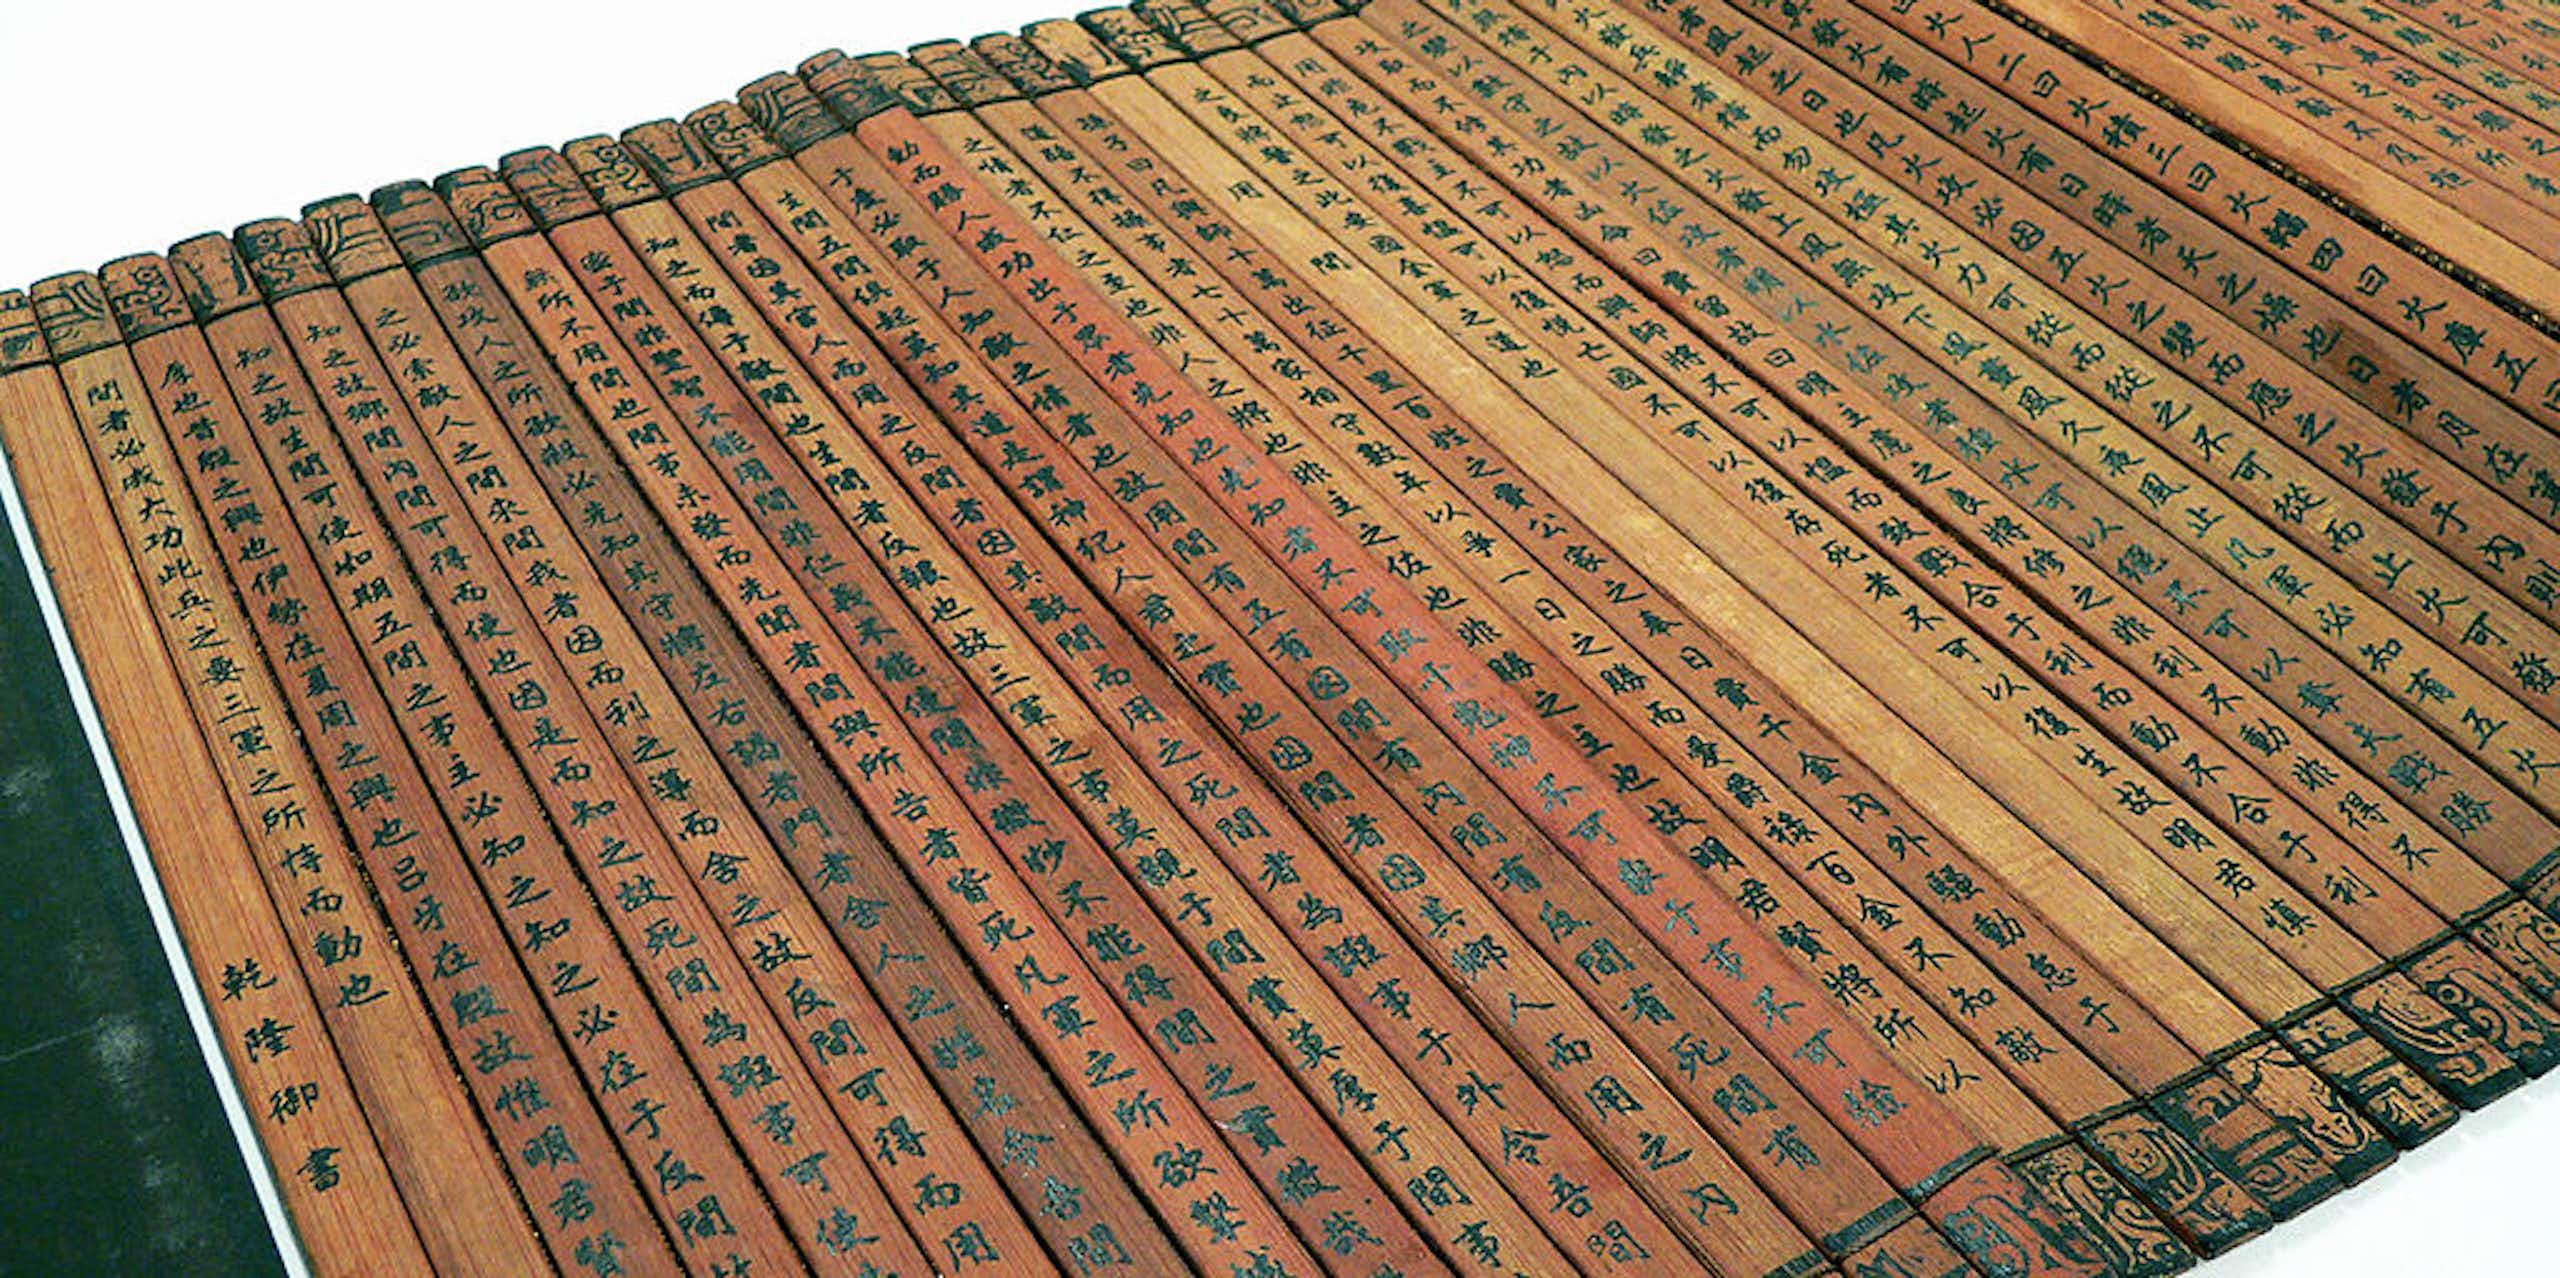 Many thin planks of bamboo tied together to form a book, with Chinese characters written on them.